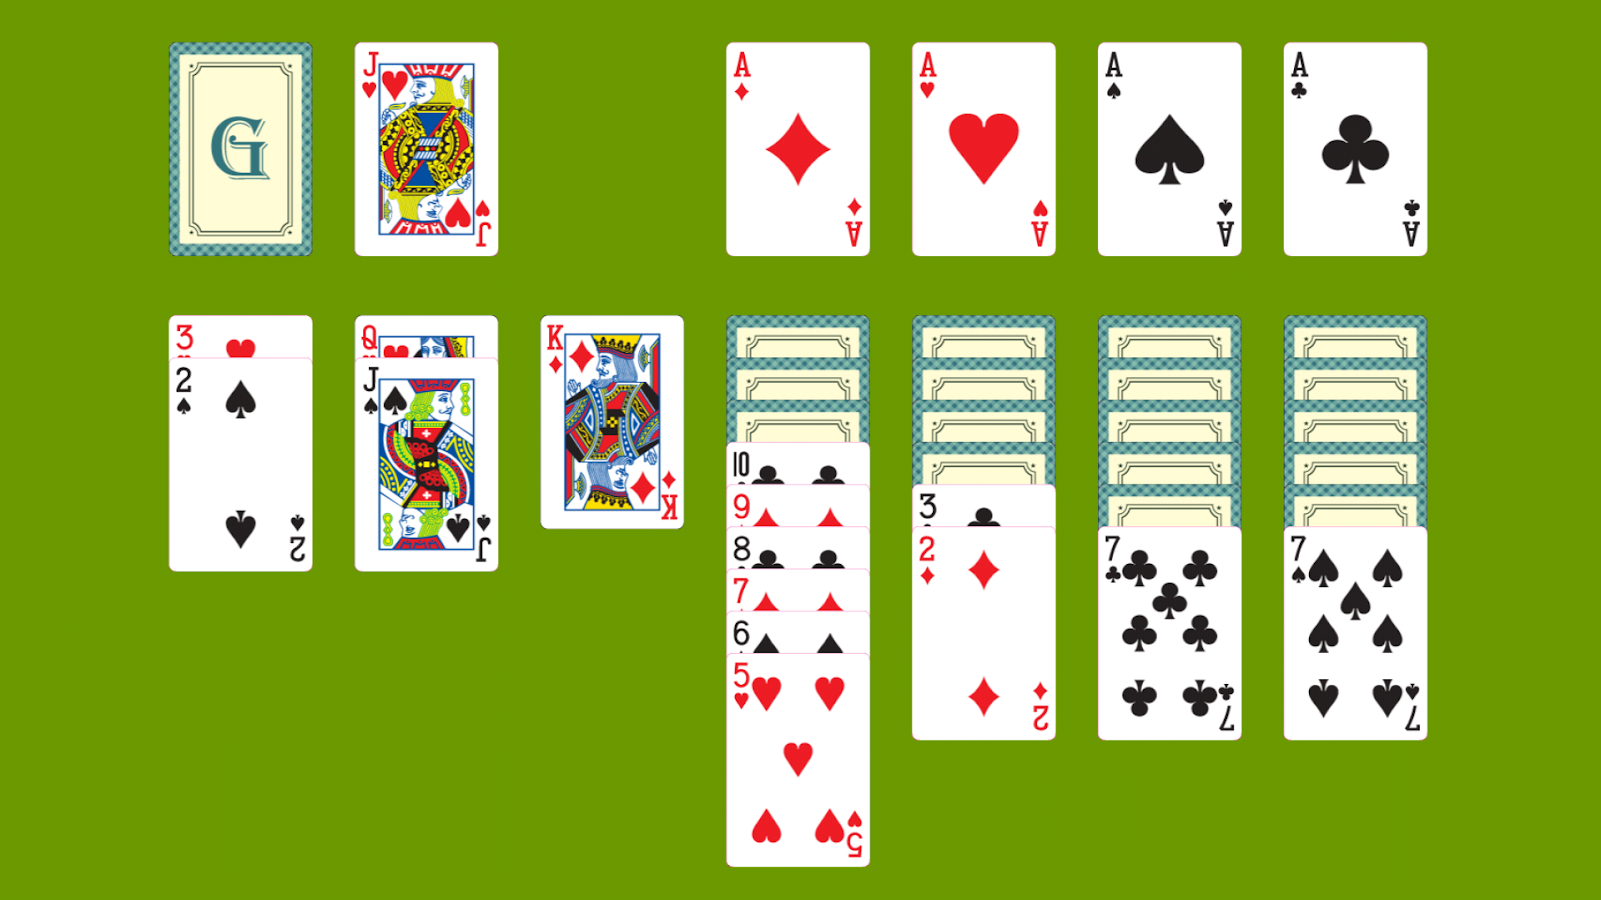 Play free spider solitaire online - google